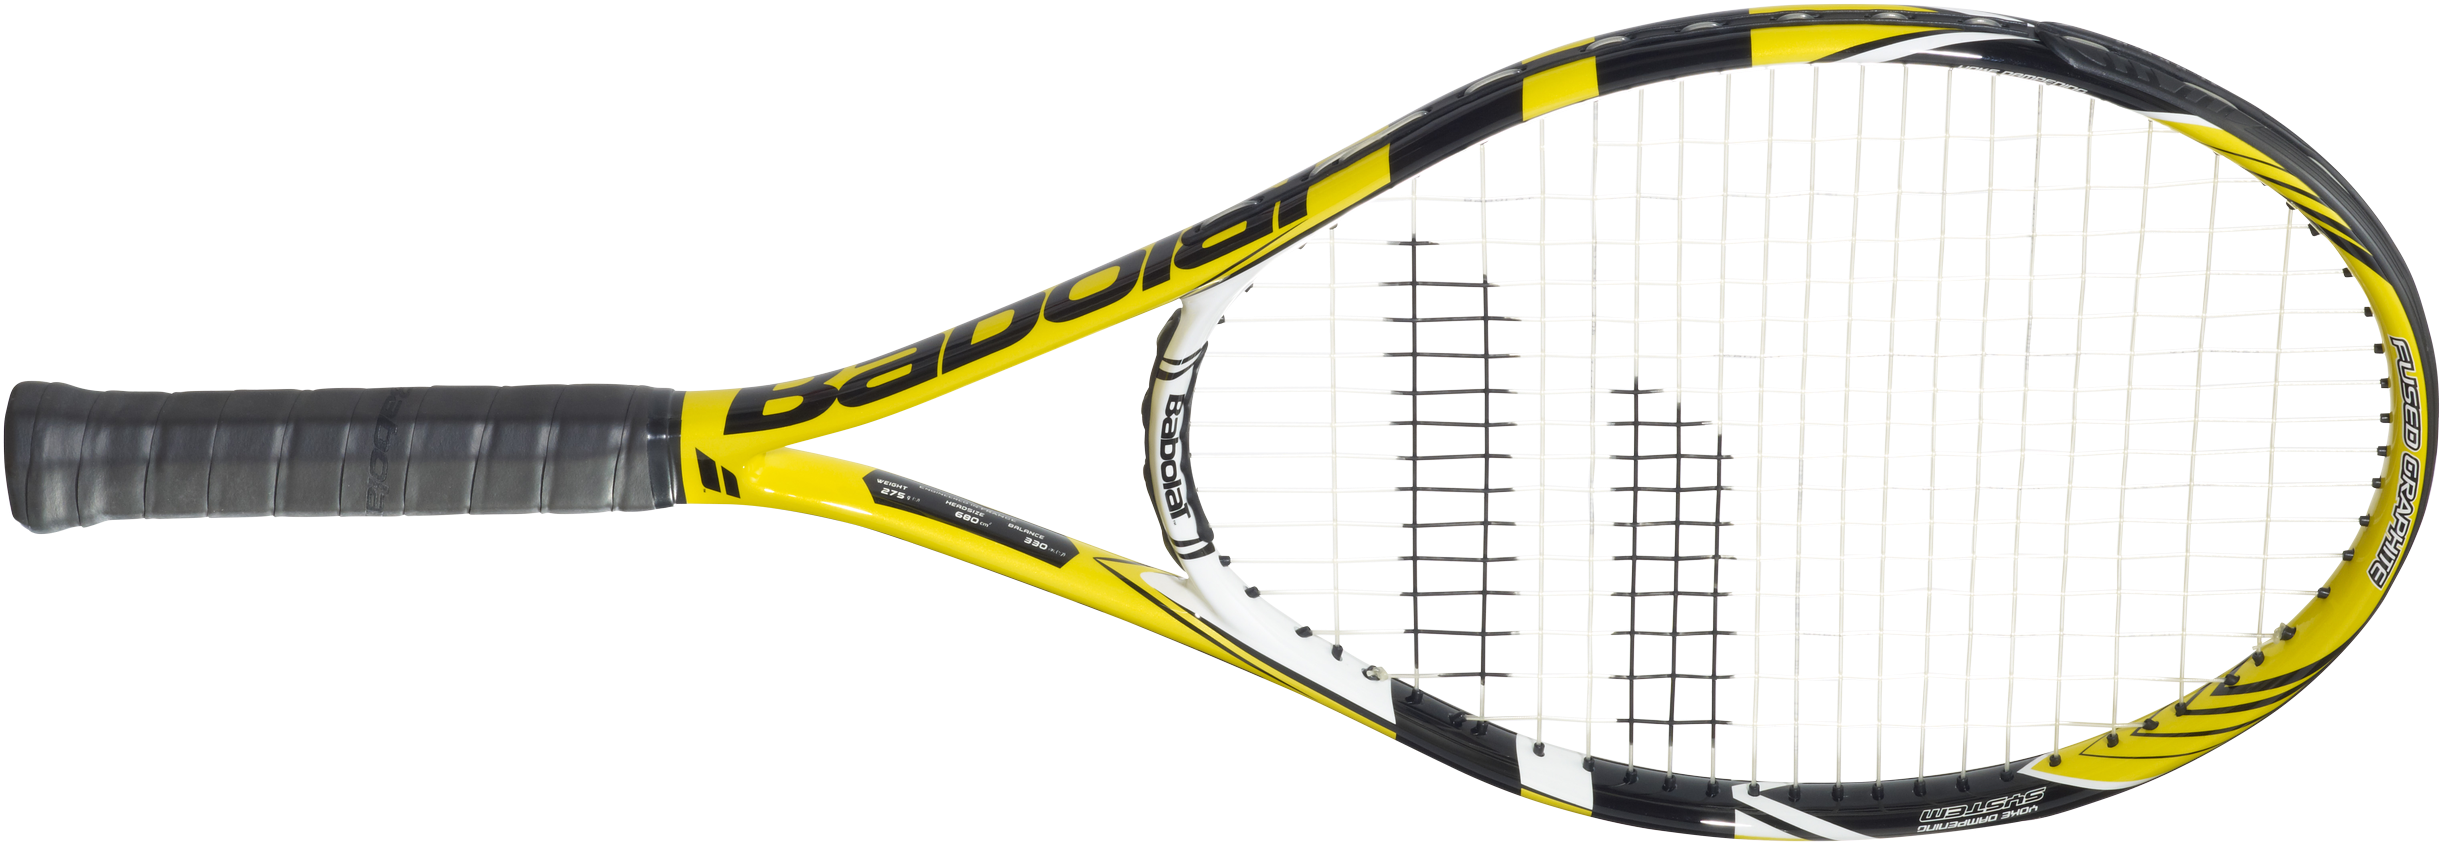 Tennis Png Images Free Download, Tennis Ball Racket - Transparent Background Tennis Racquet Png (2500x904)